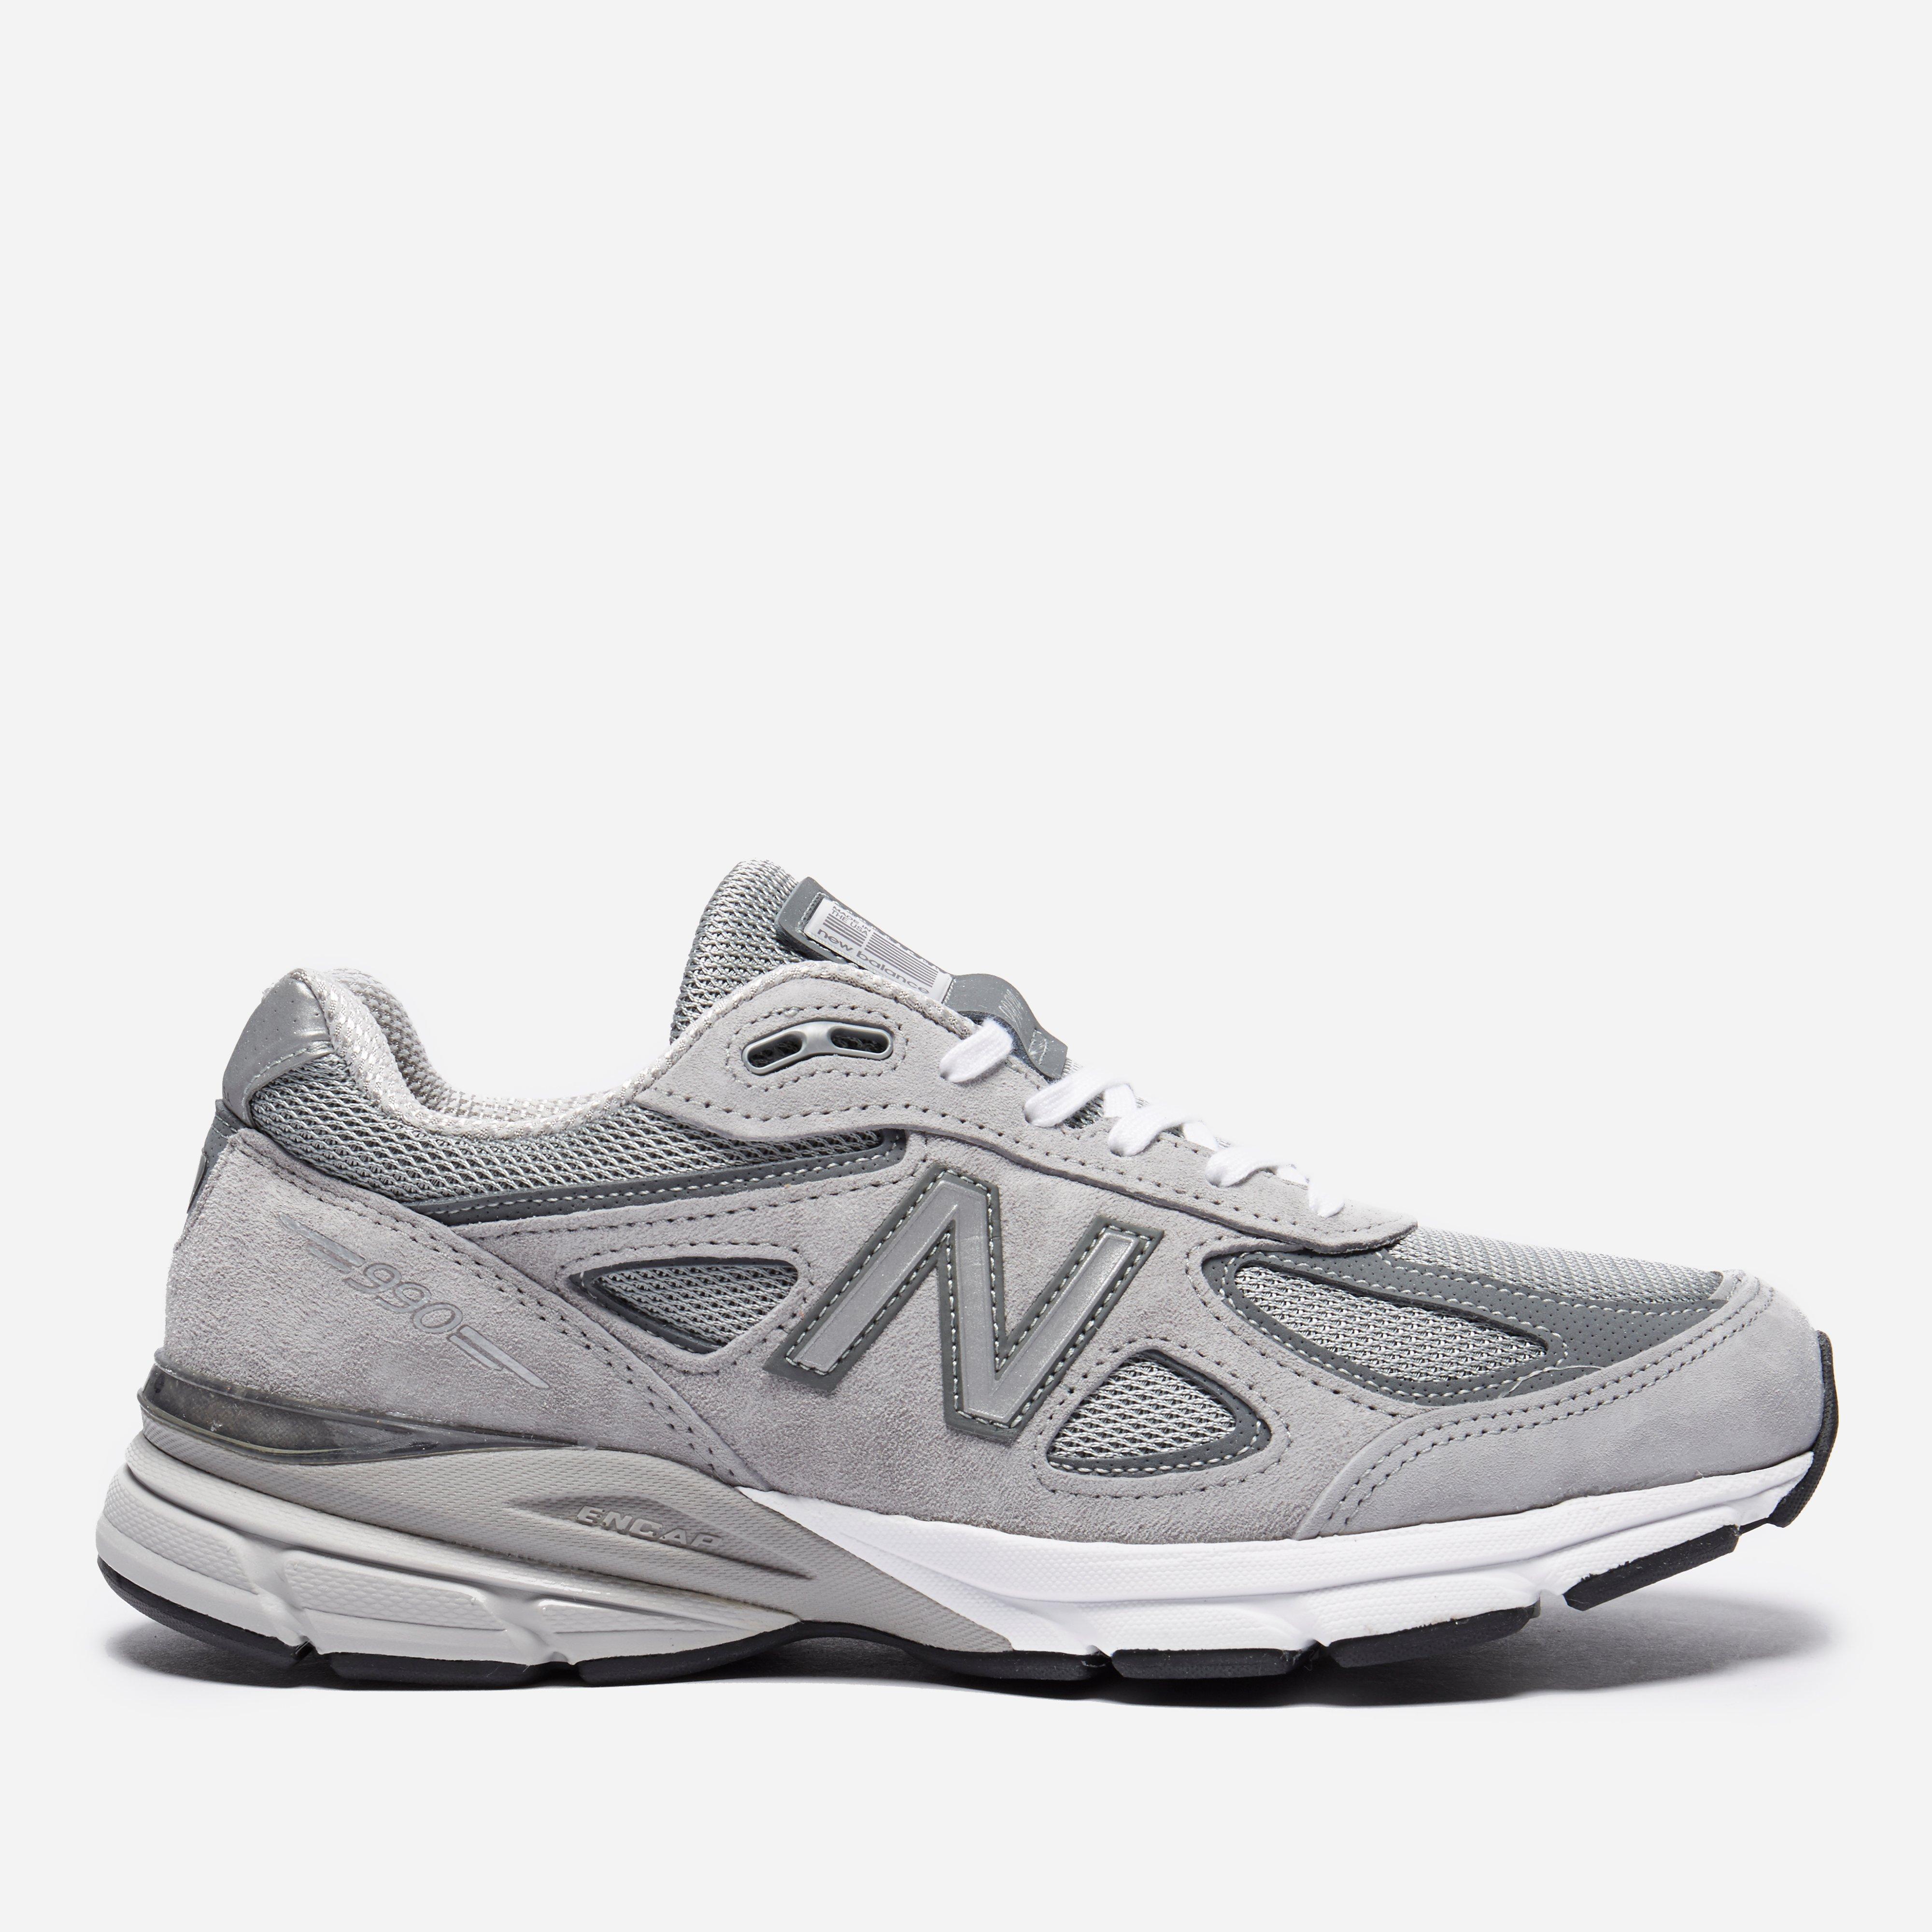 New Balance M 990 Gl4 Made In Usa in Grey (Gray) for Men - Lyst